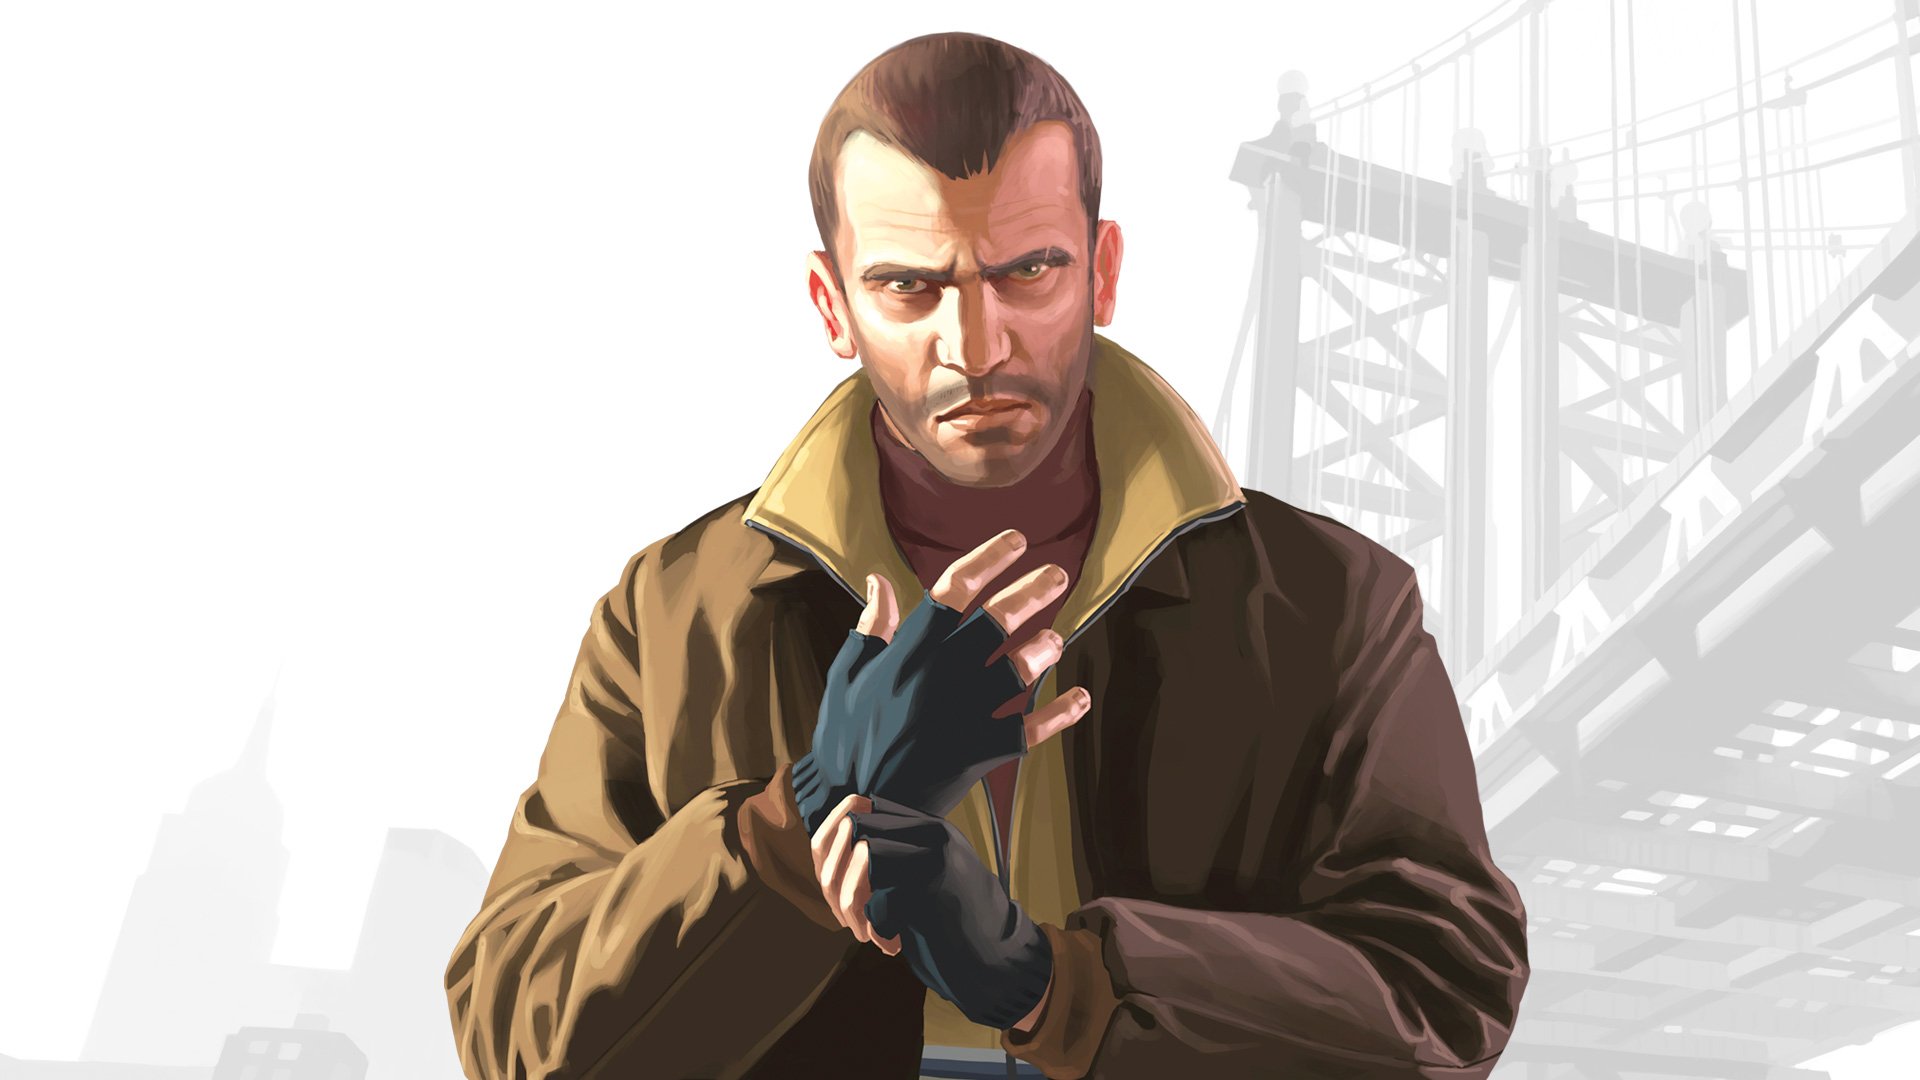 Niko Bellic, an Iconic Video Game Character | Source: Rockstar